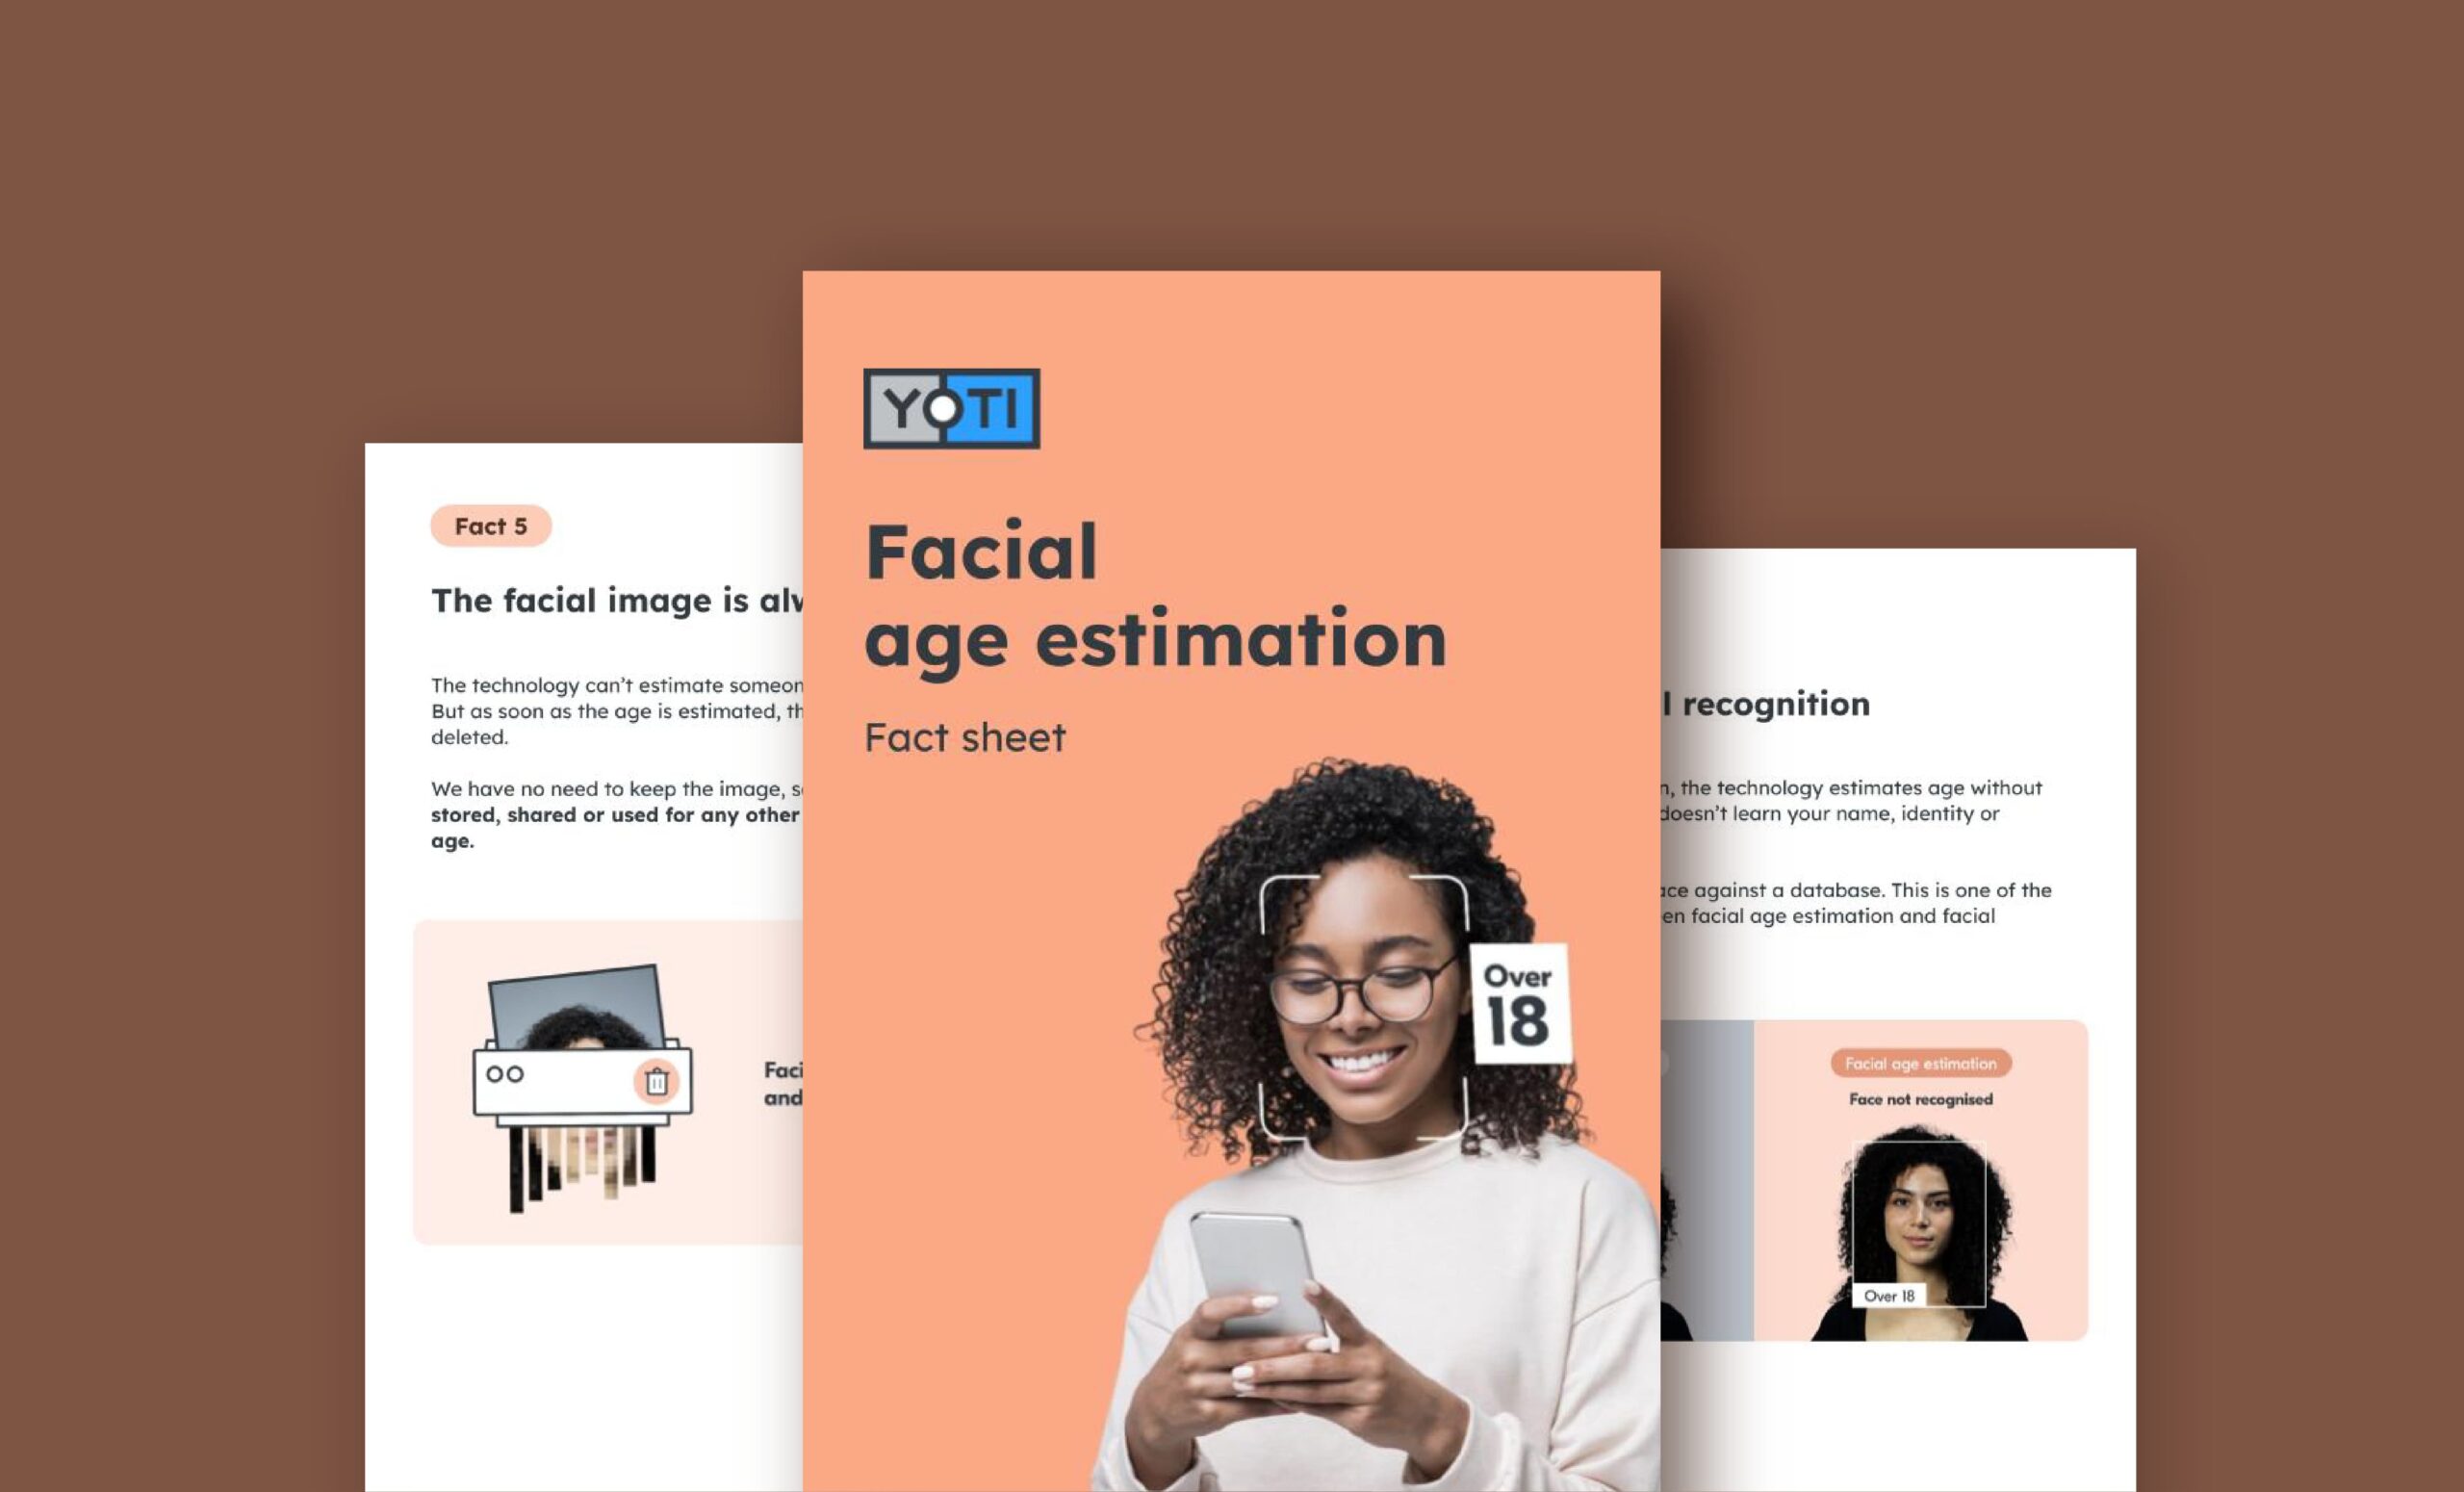 Preview image of Yoti's Facial Age Estimation fact sheet which will help users learn more about what facial age estimation does and does not do